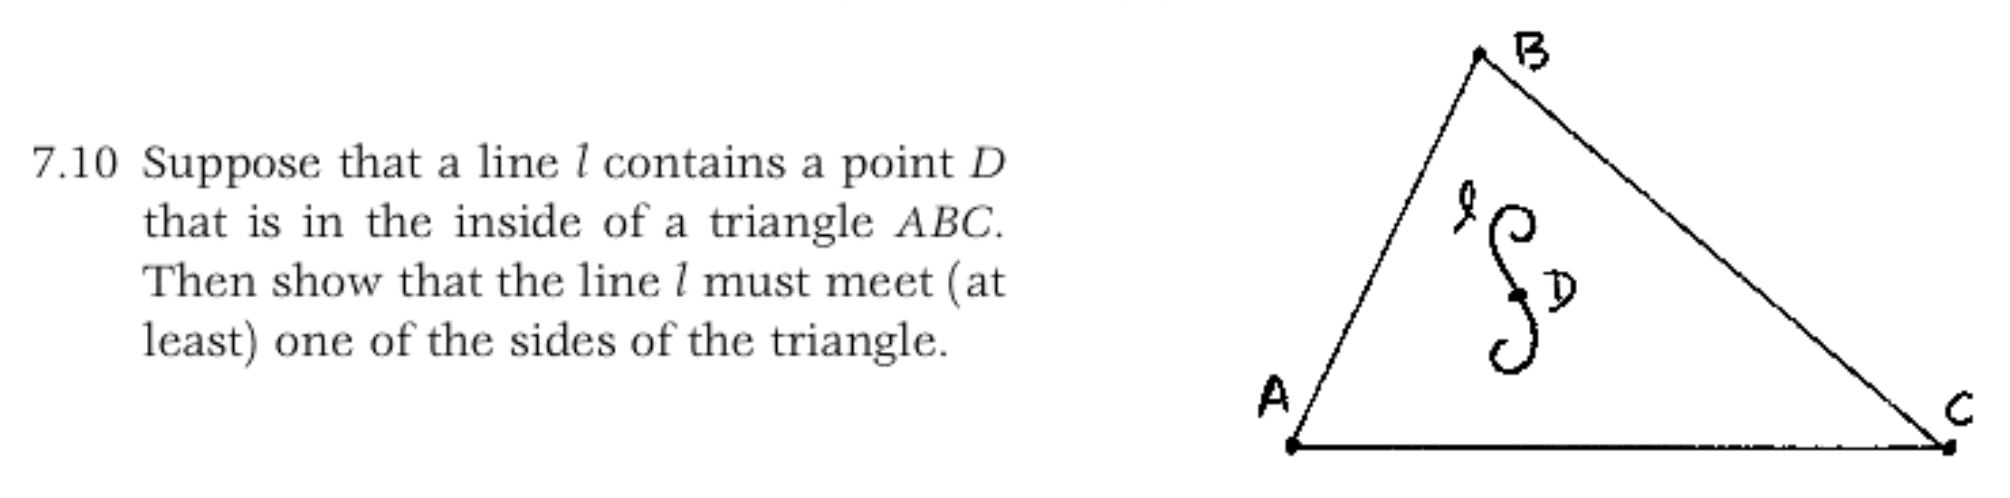 7.10 Suppose that a line l contains a point D
that is in the inside of a triangle ABC.
Then show that the line l must meet (at
least) one of the sides of the triangle
